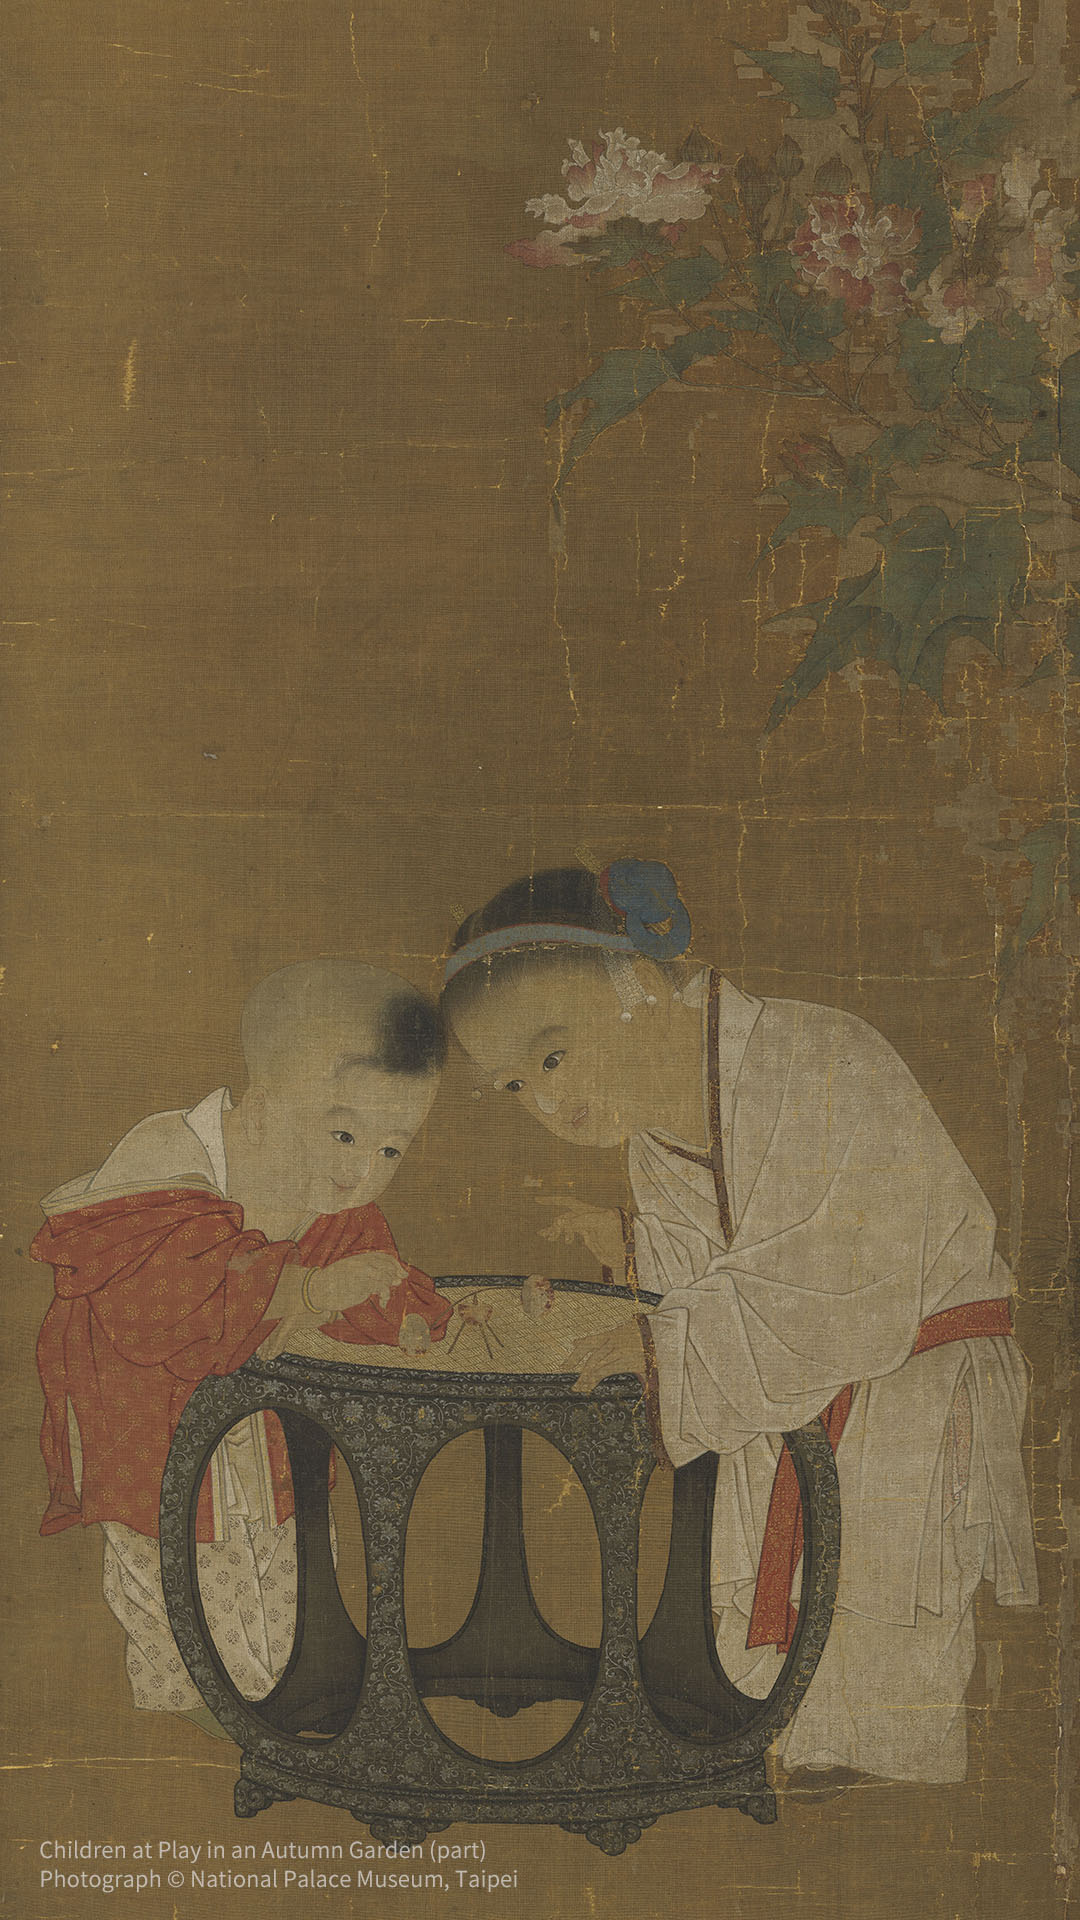 Paintings of childhood in the Song Dynasty